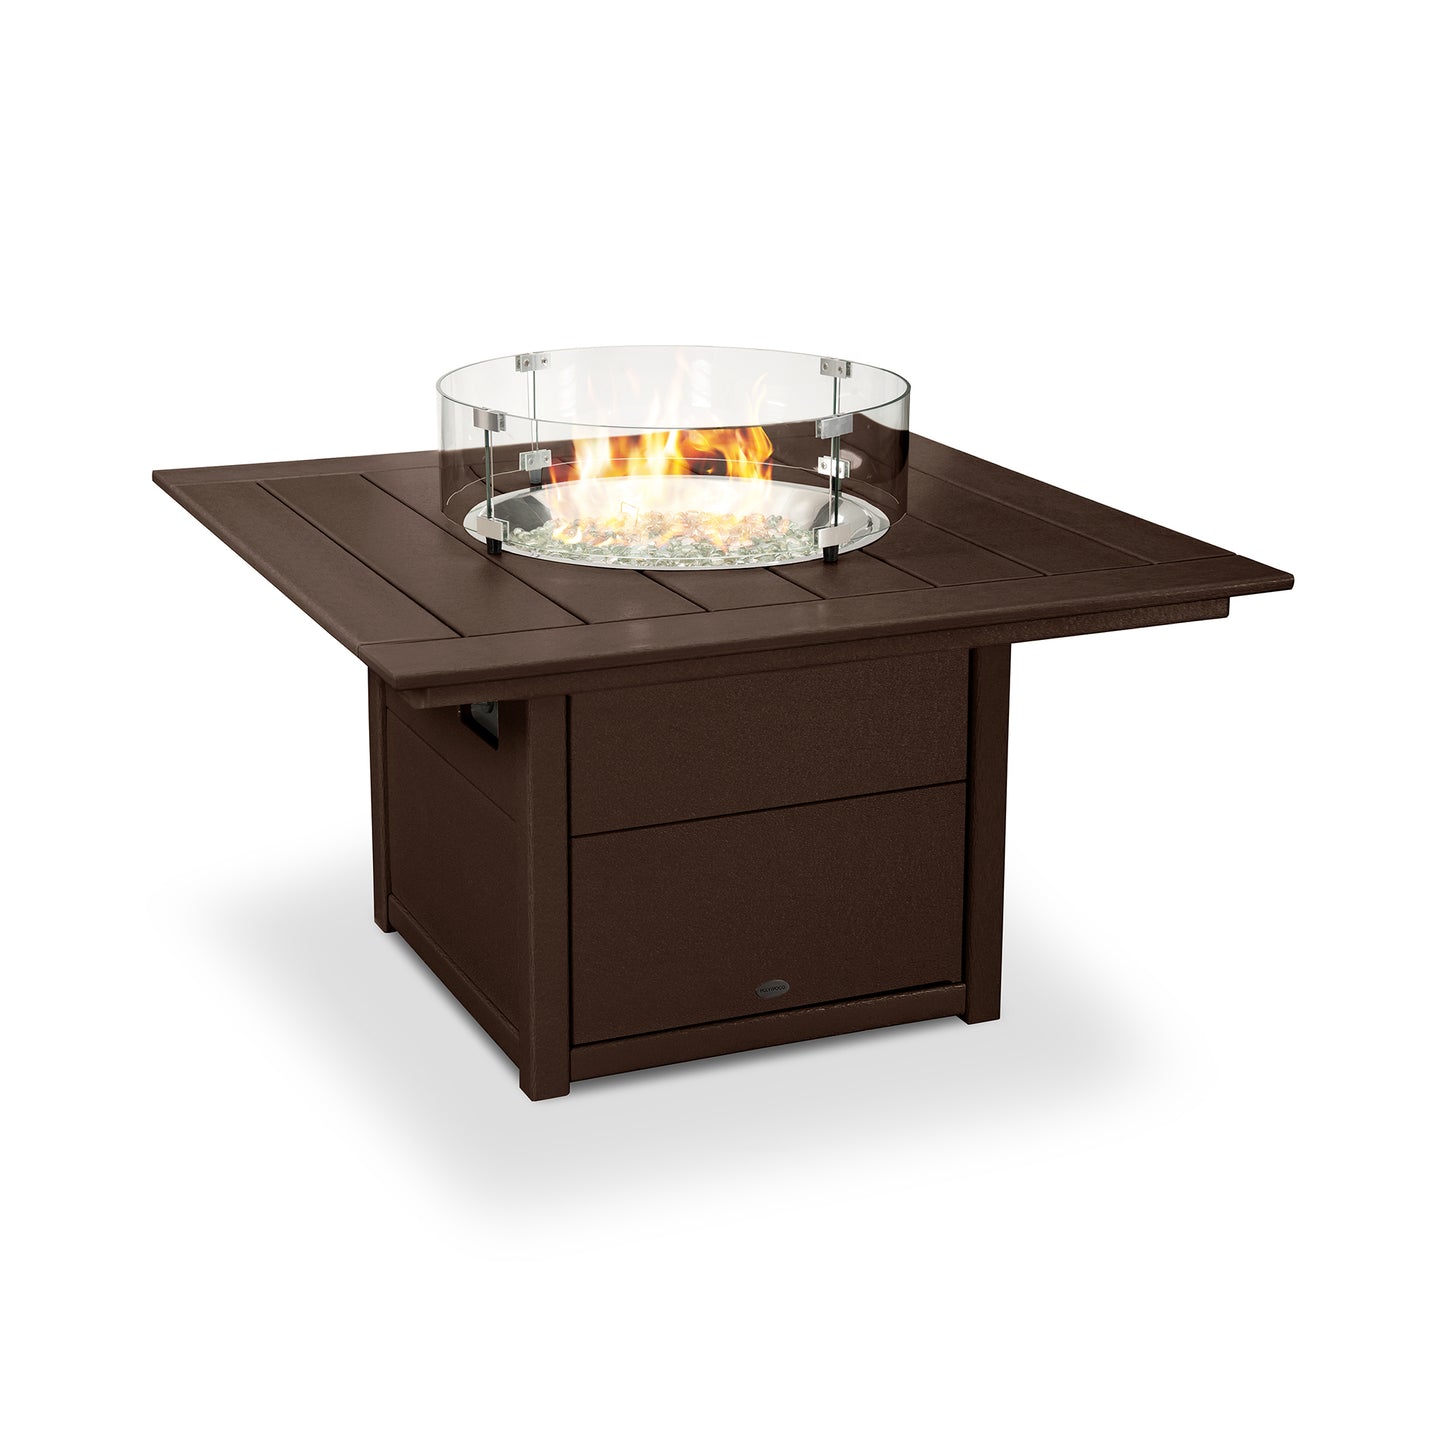 A square POLYWOOD Square 42" fire pit table with a dark brown finish and glass wind guard, featuring visible flames and ornamental rocks inside the glass enclosure.